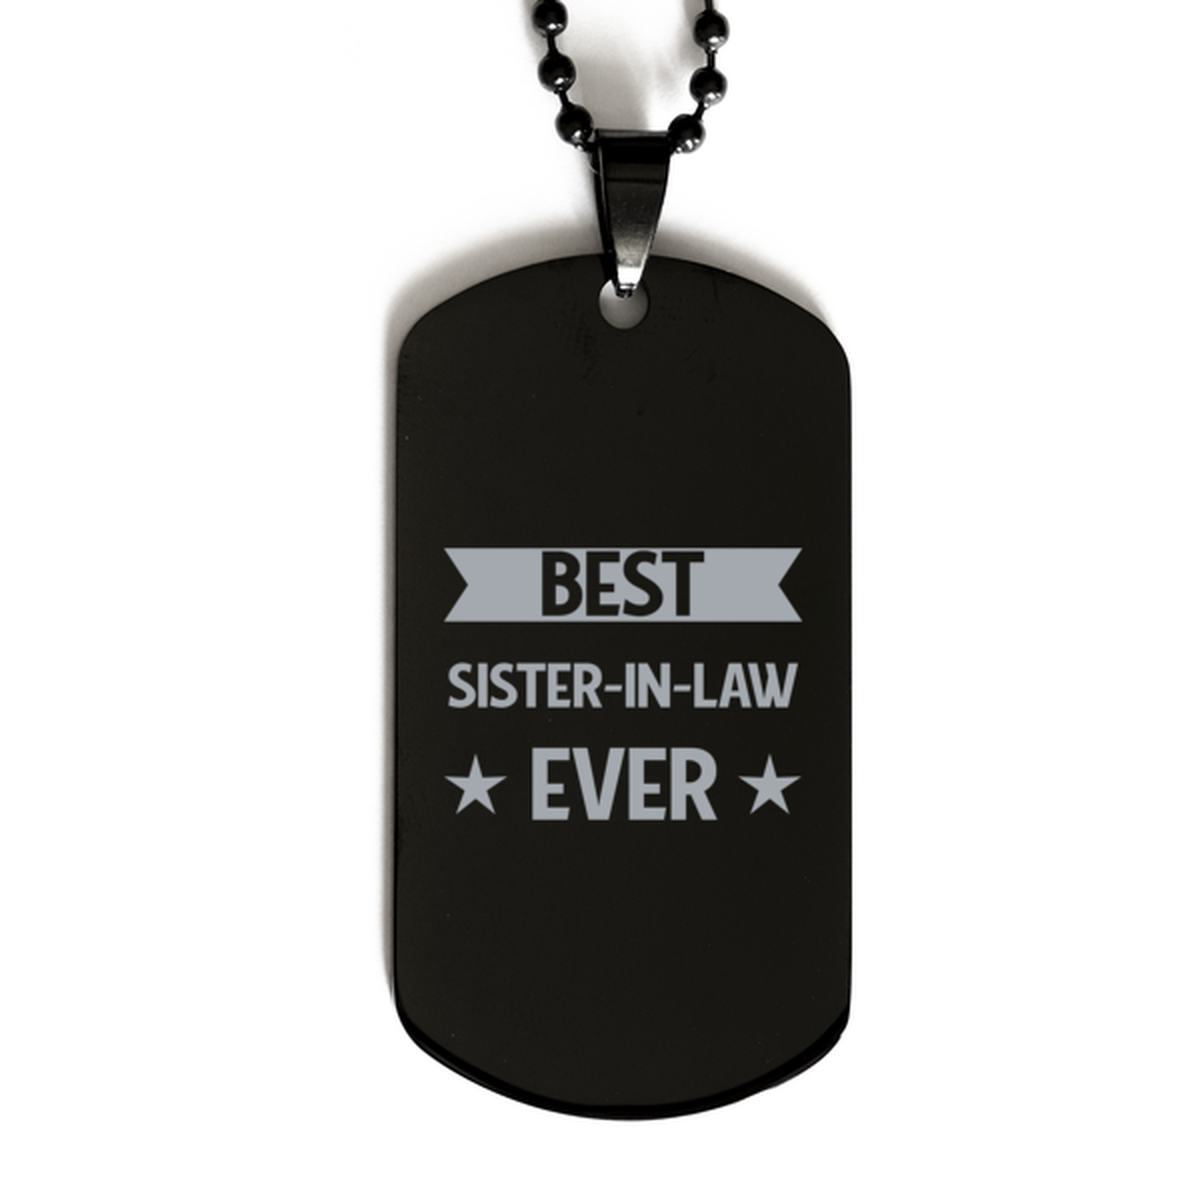 Best Sister-in-law Ever Sister-in-law Gifts, Funny Black Dog Tag For Sister-in-law, Birthday Family Presents Engraved Necklace For Women